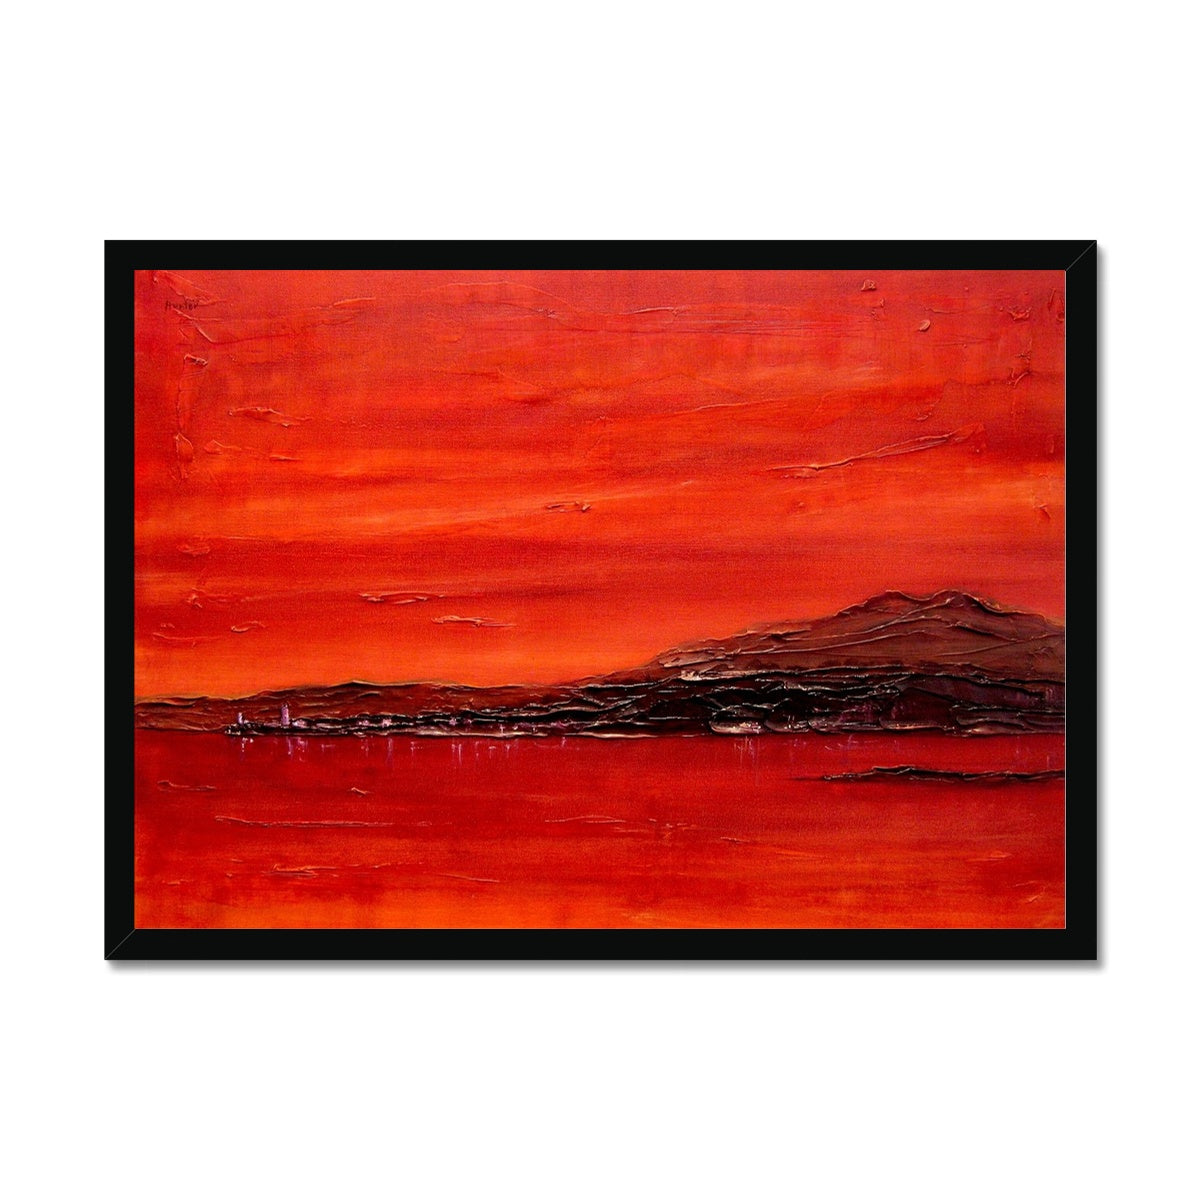 Toward Point Lighthouse Sunset Painting | Framed Prints From Scotland-Framed Prints-Arran Art Gallery-A2 Landscape-Black Frame-Paintings, Prints, Homeware, Art Gifts From Scotland By Scottish Artist Kevin Hunter